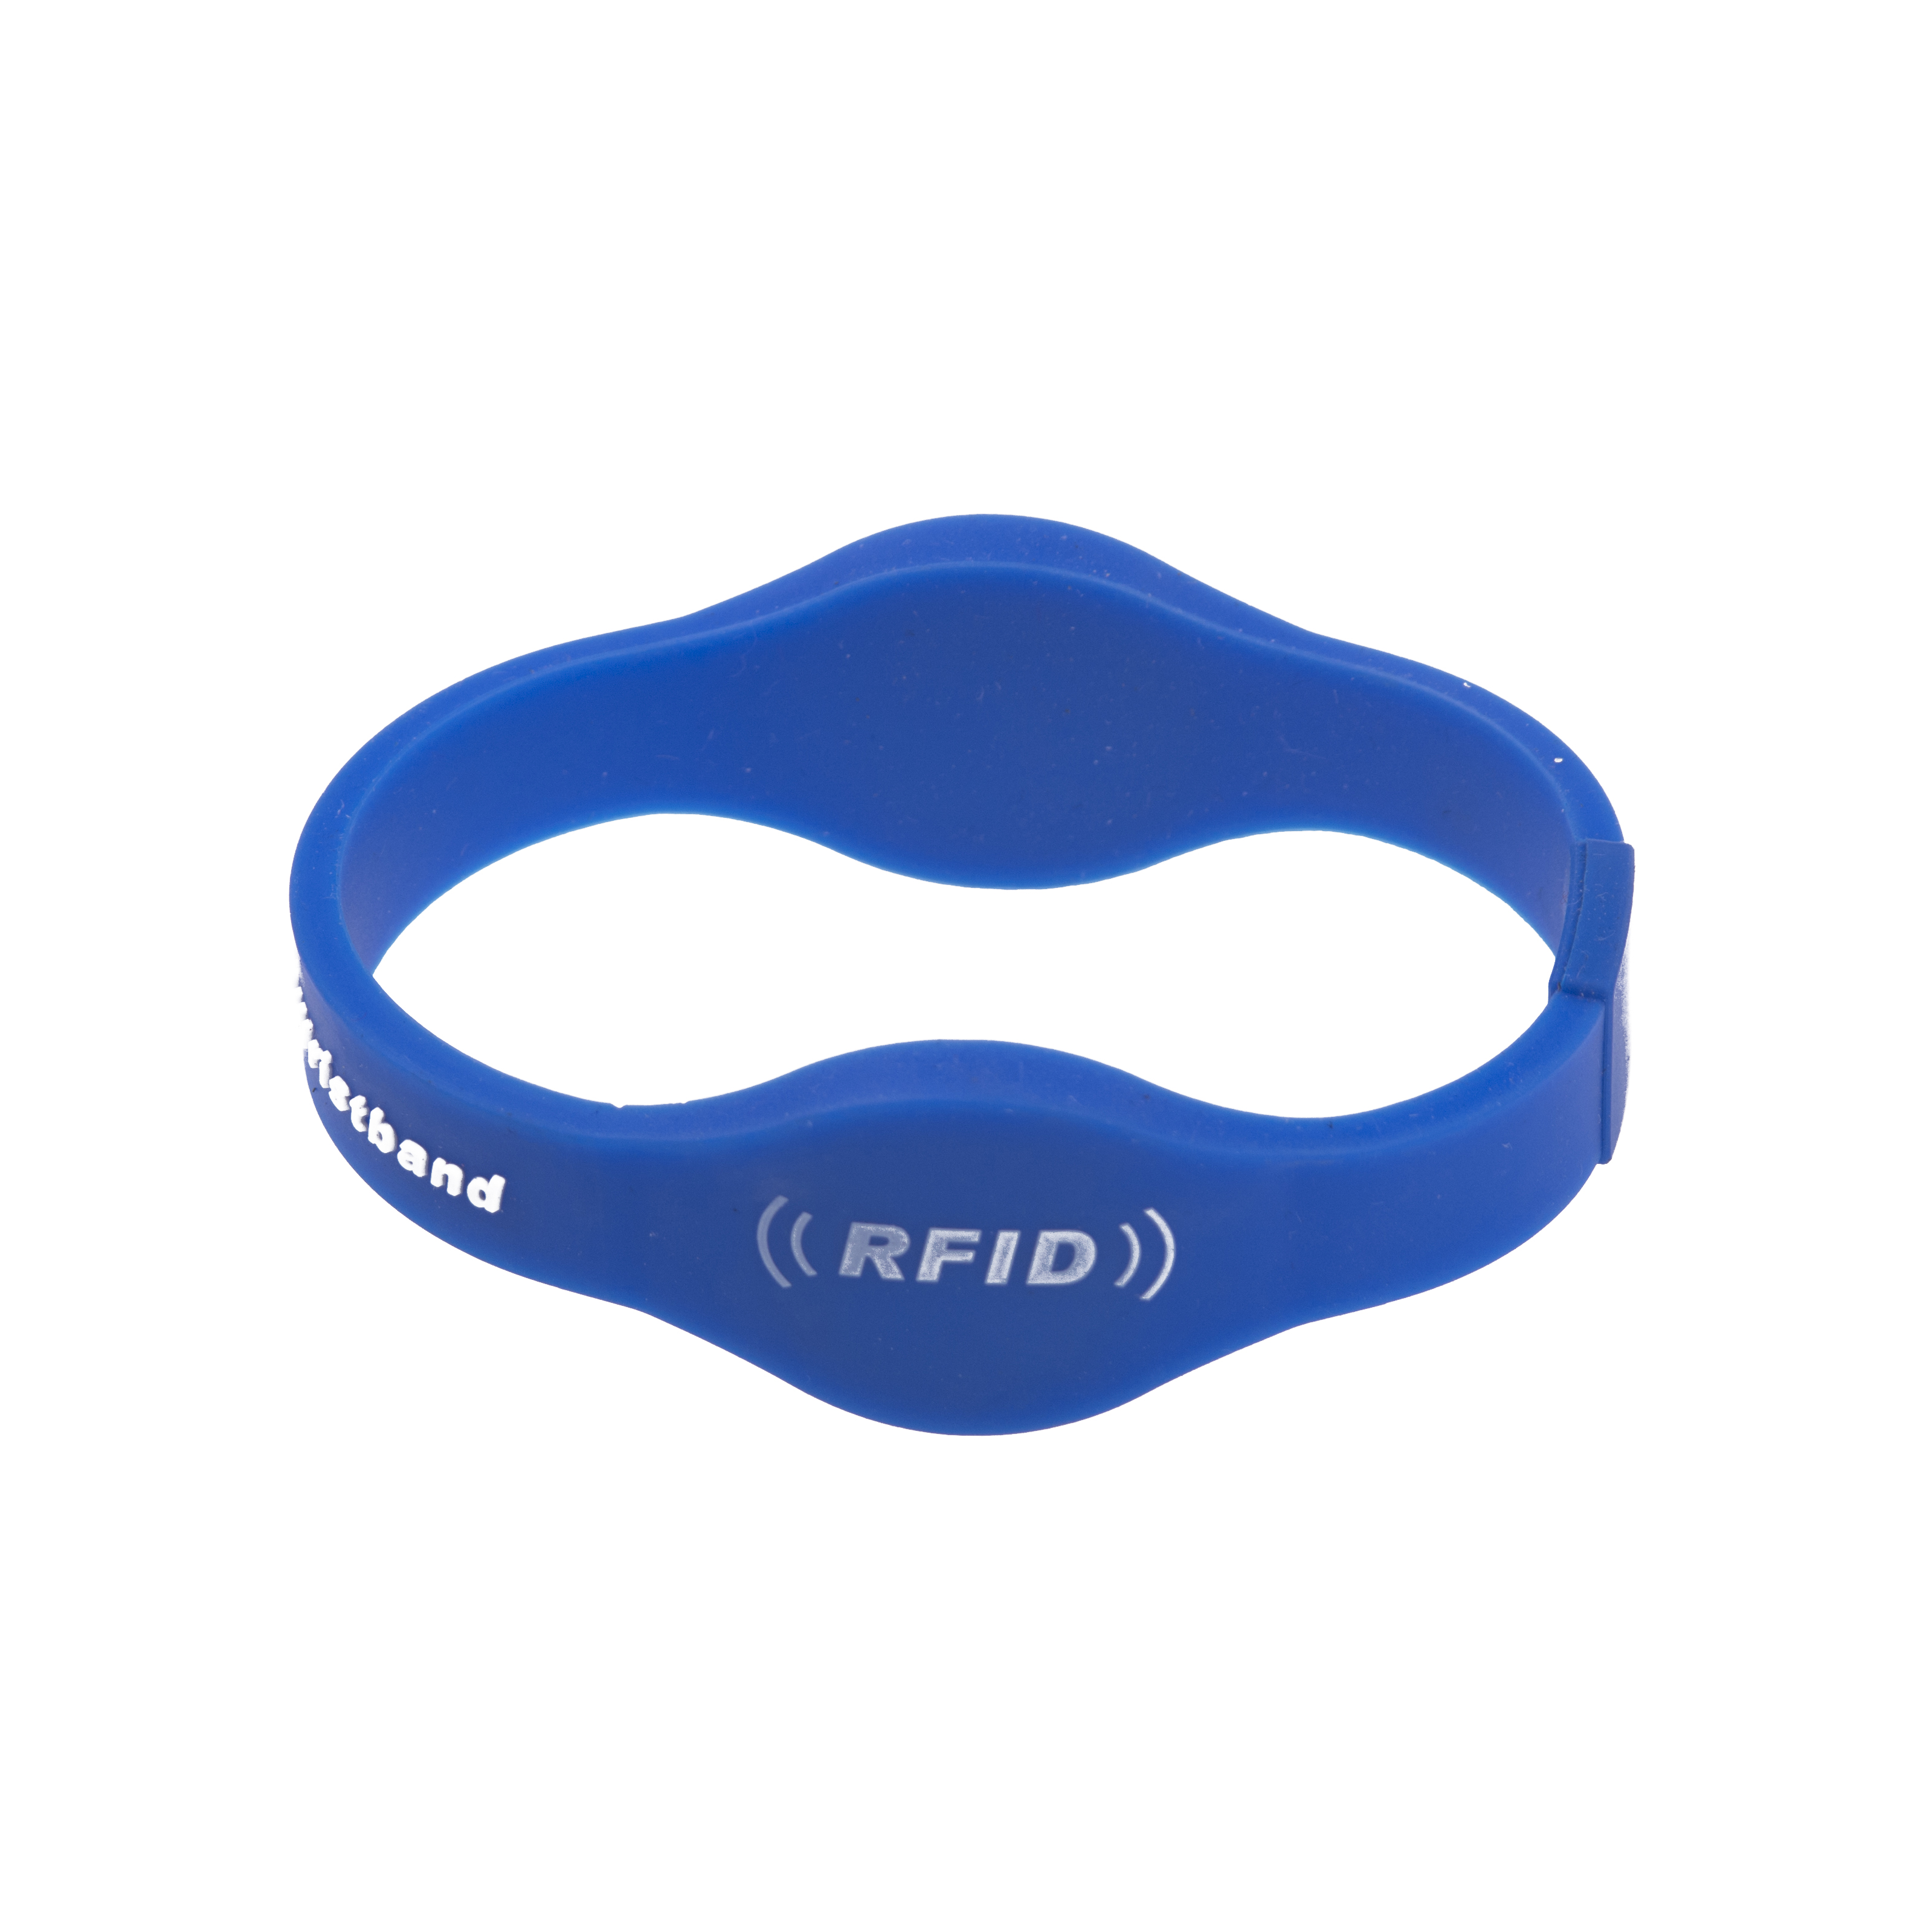 NS10 Dual Frequency RFID Silicone Wristband, dual rfid nfc chips bracelet